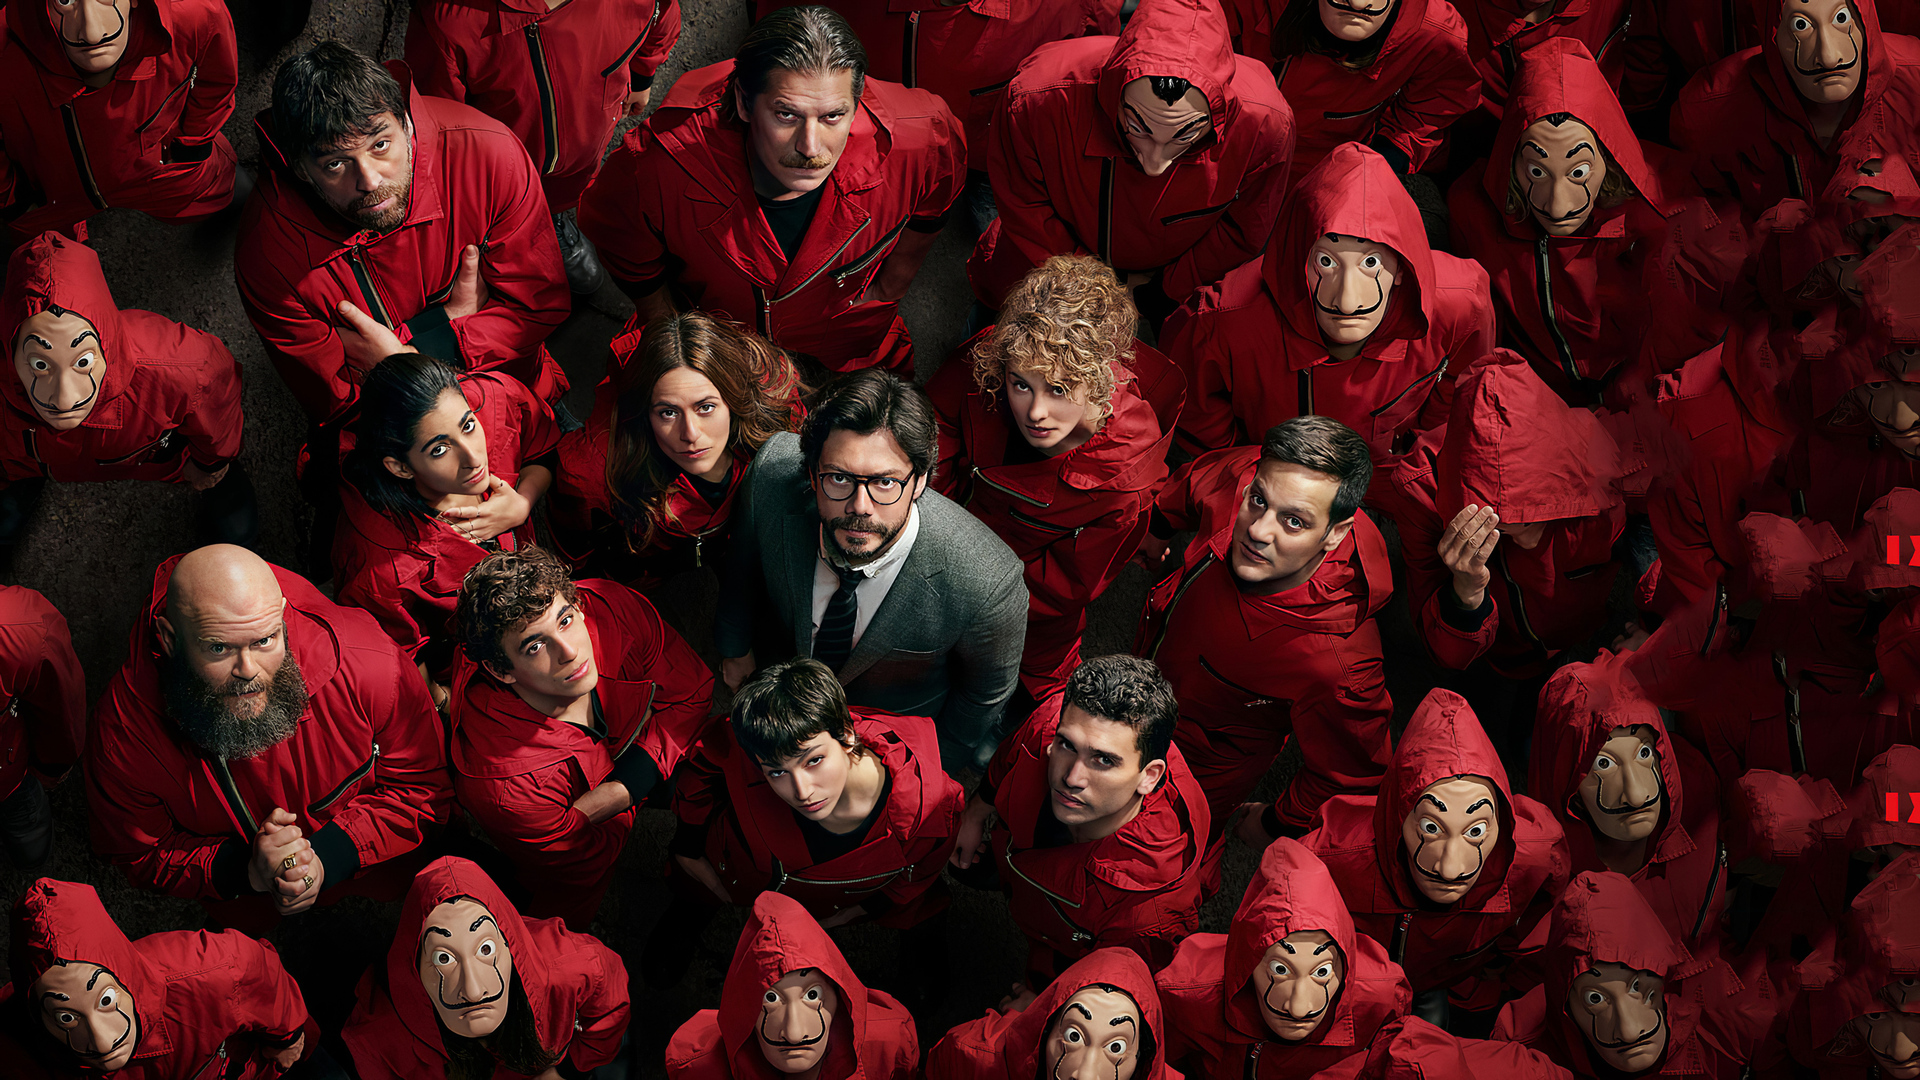 Money Heist Wallpaper 4K For Laptop / Money Heist, Mask, Rainbow Six Siege, 4K, #5.1759 Wallpaper - We have the best collection of money heist wallpapers top quality backgrounds which , you can set as wallpaper on your iphone, desktop and android mobile for free.